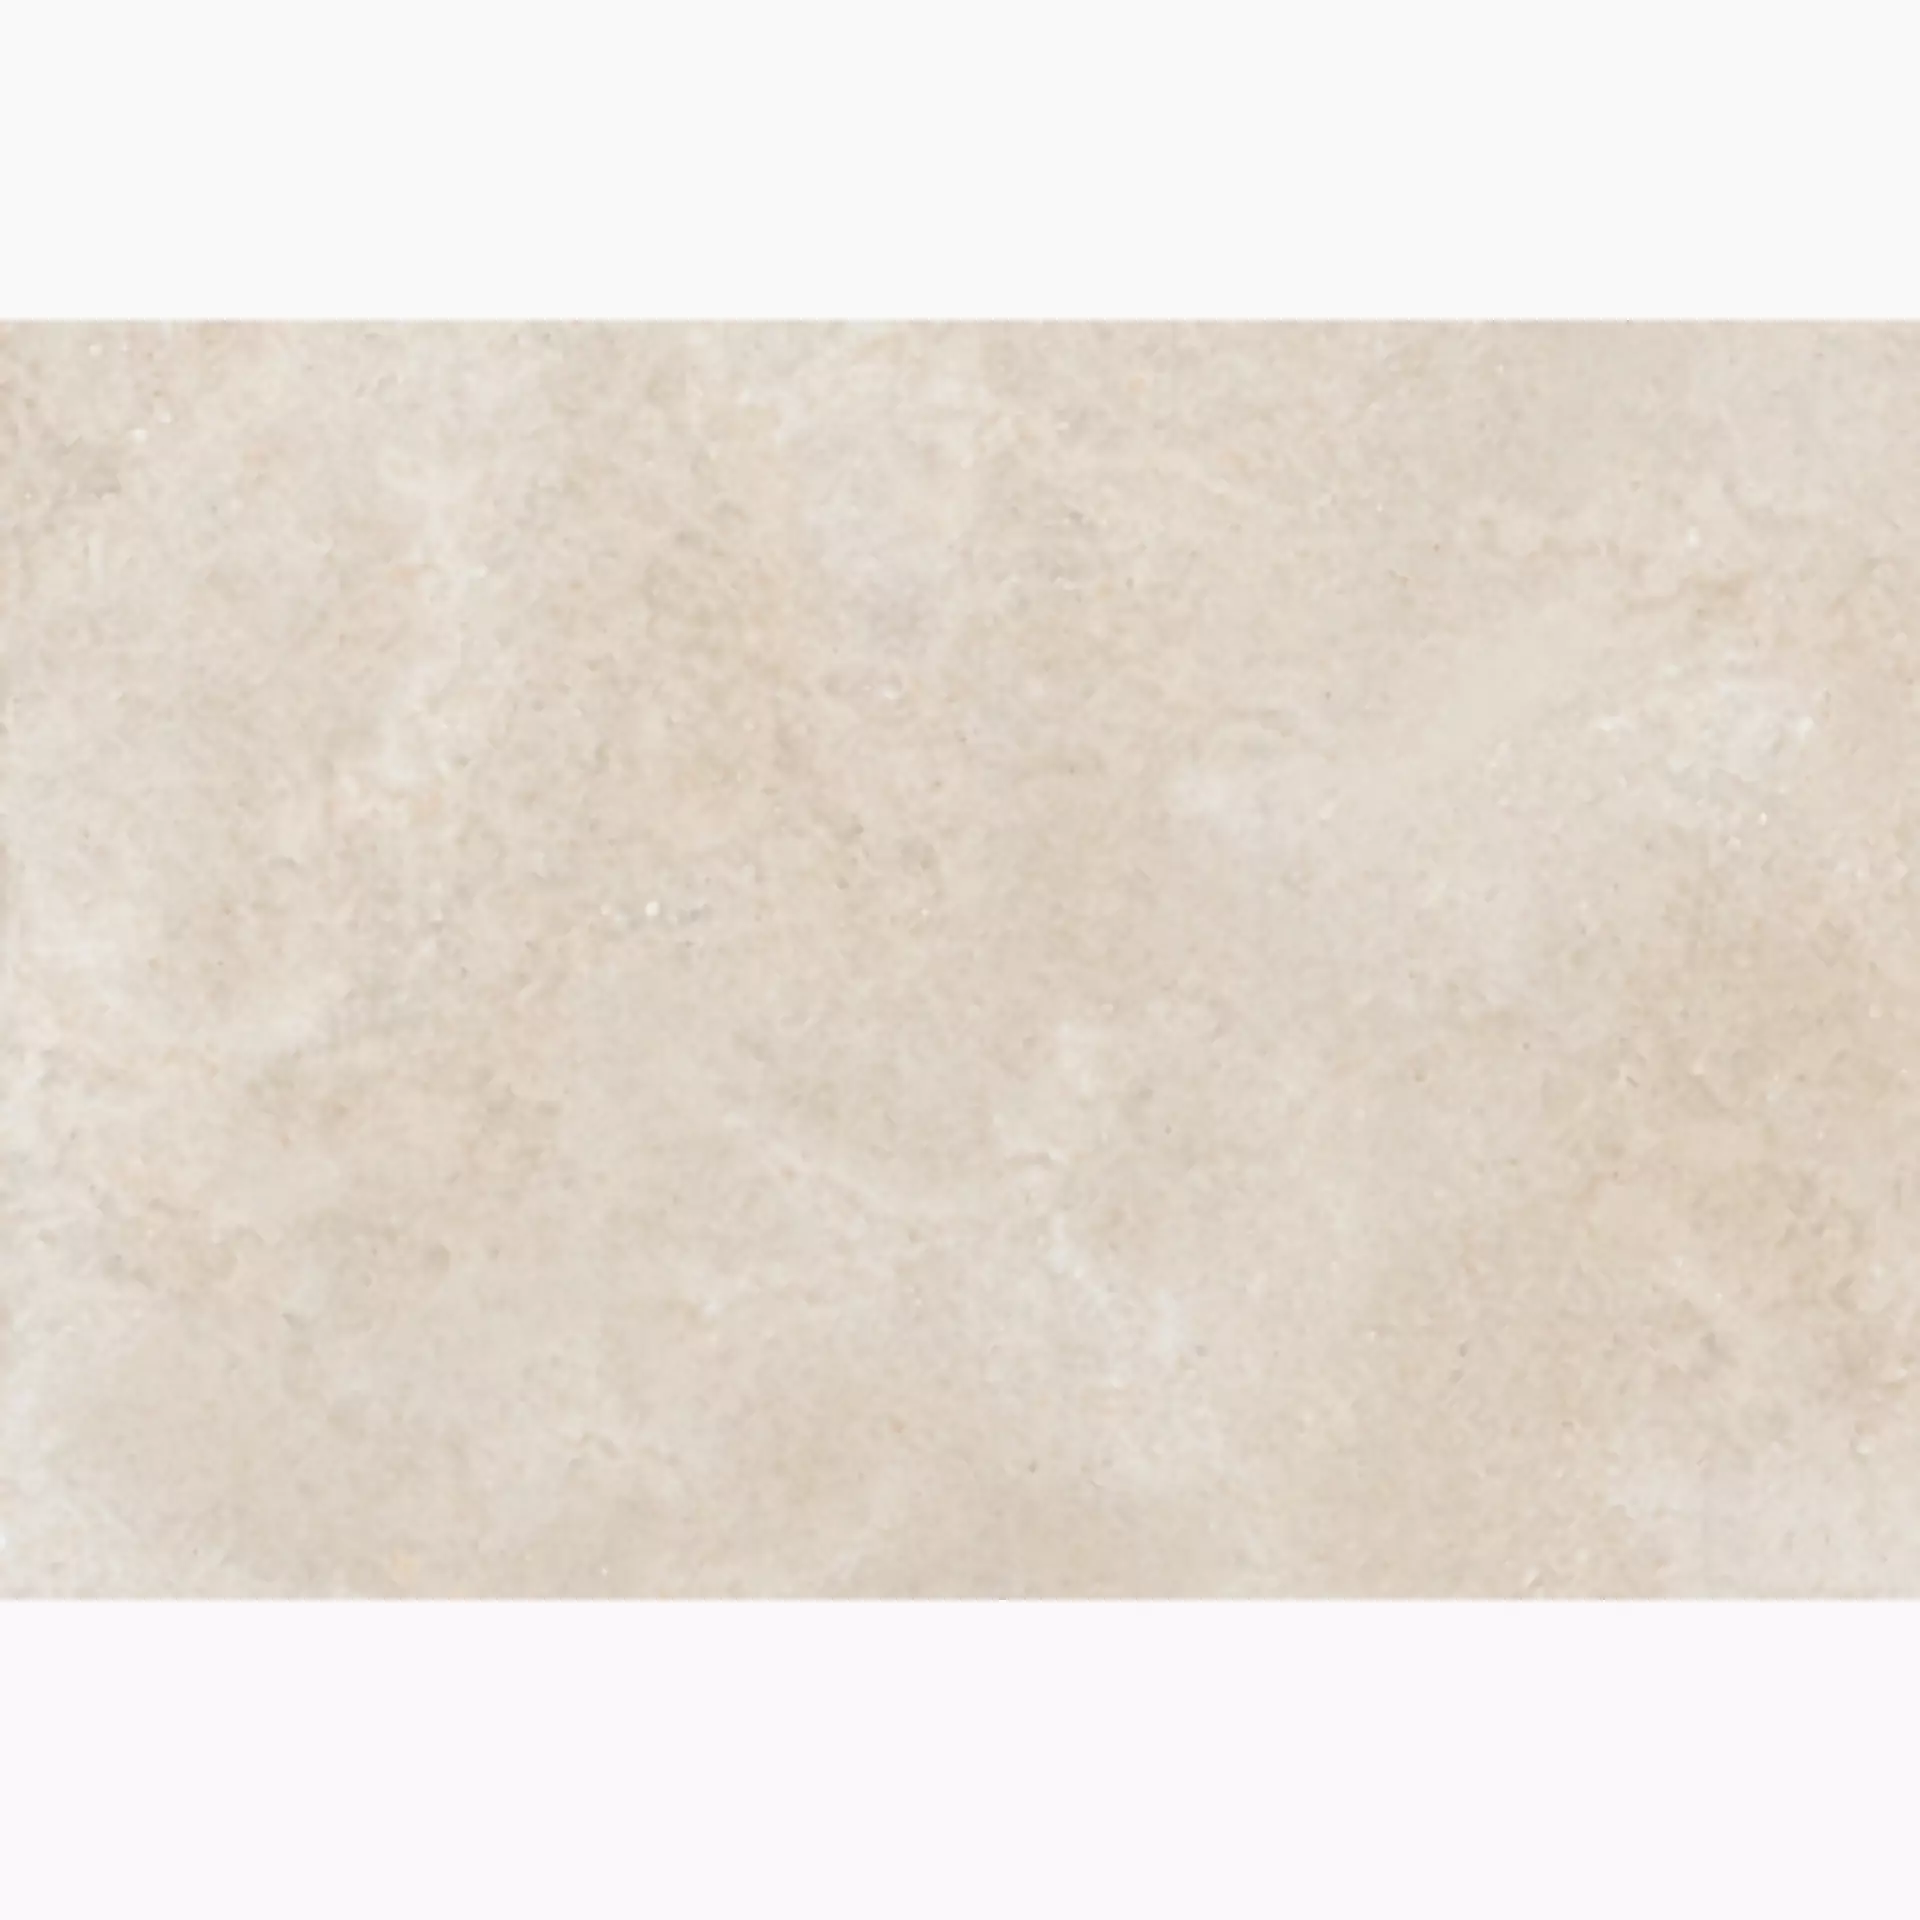 Keope Brystone Ivory Strutturato 44595733 60x90cm rectified 20mm